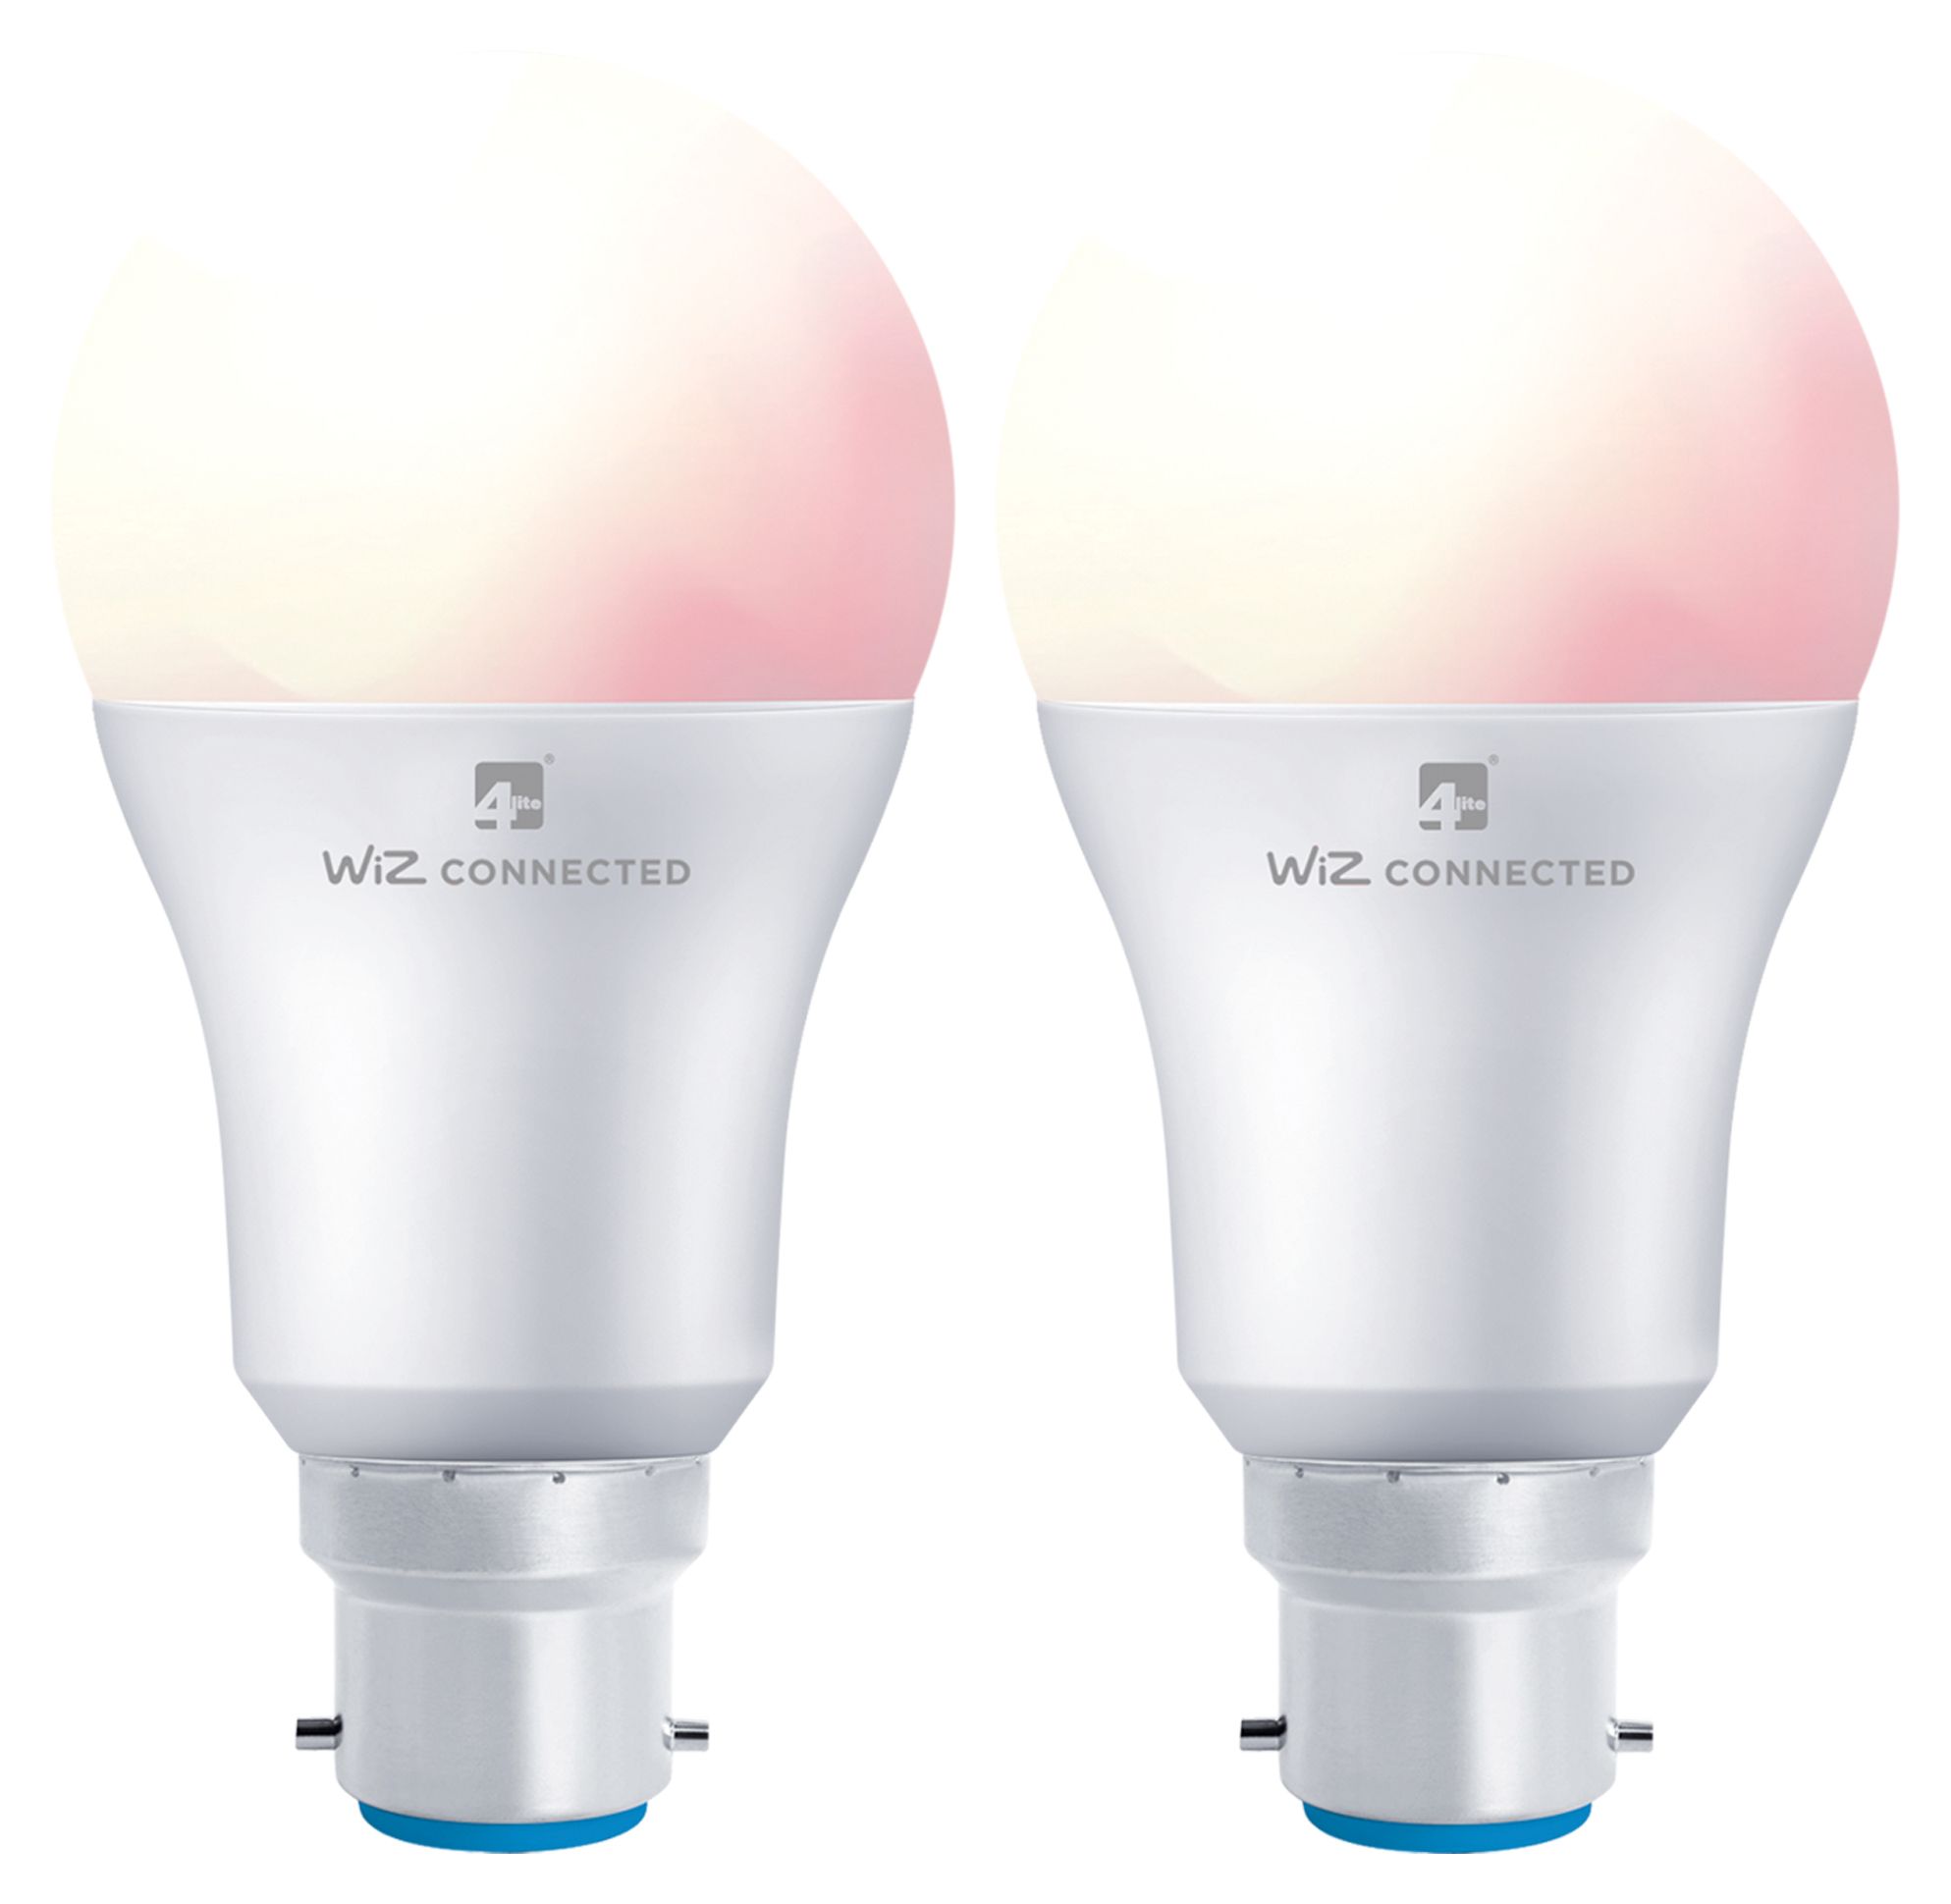 Image of 4lite WiZ Connected LED SMART B22 Light Bulbs - White & Colour - Pack of 2